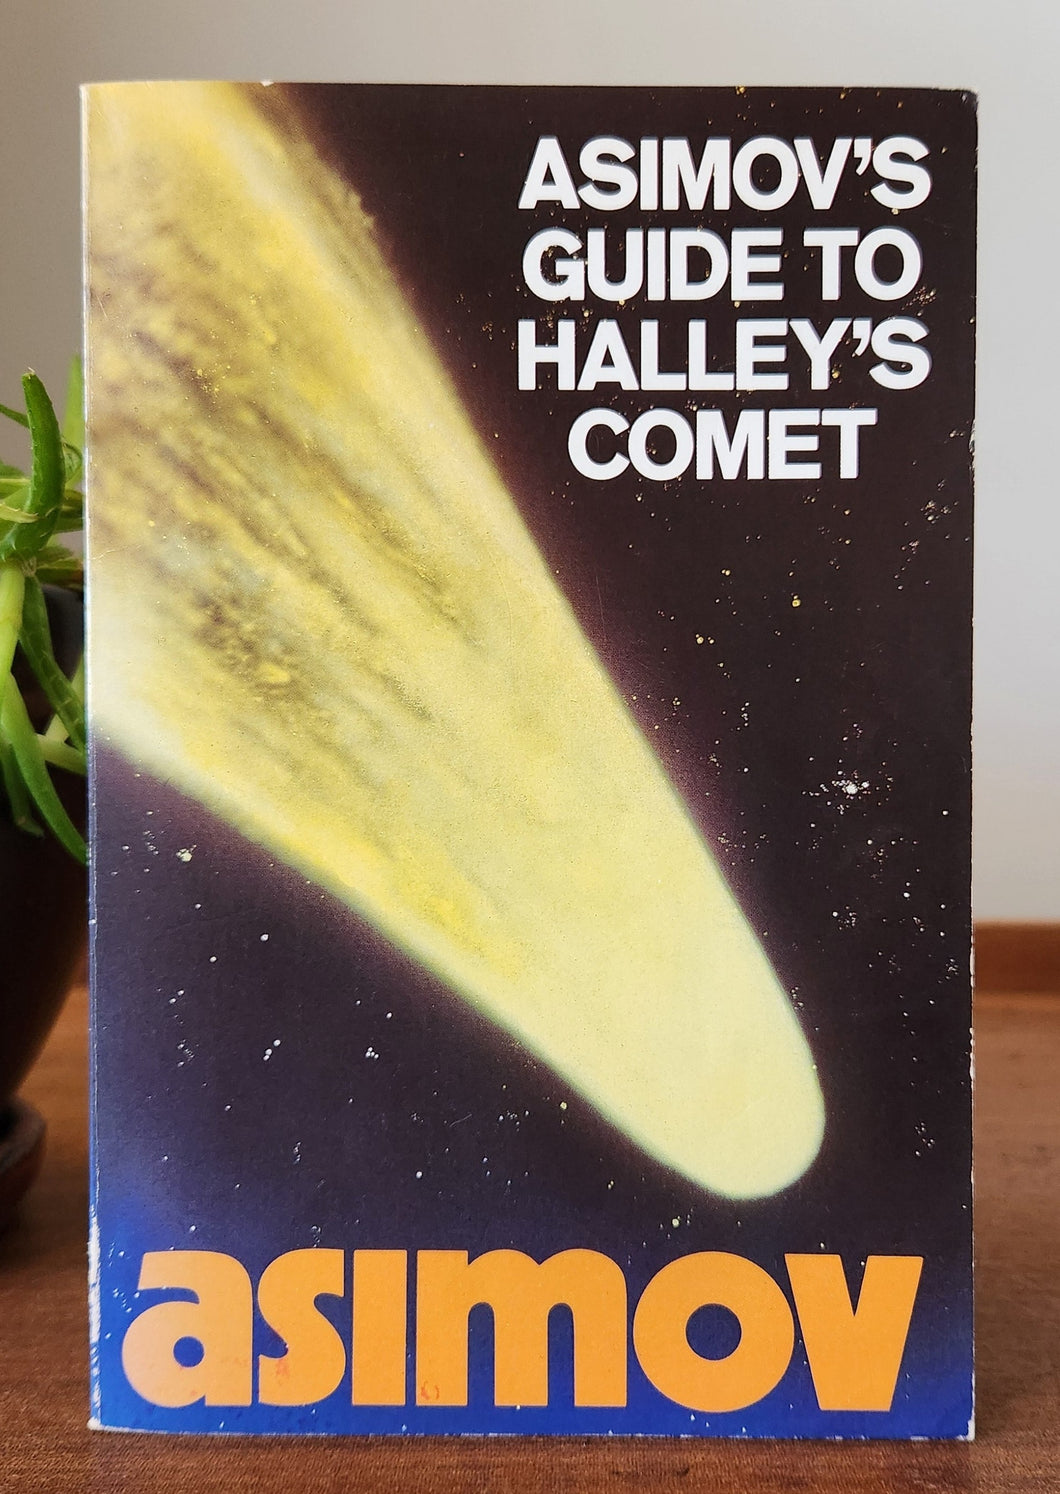 Asimov's Guide to Halley's Comet by Isaac Asimov